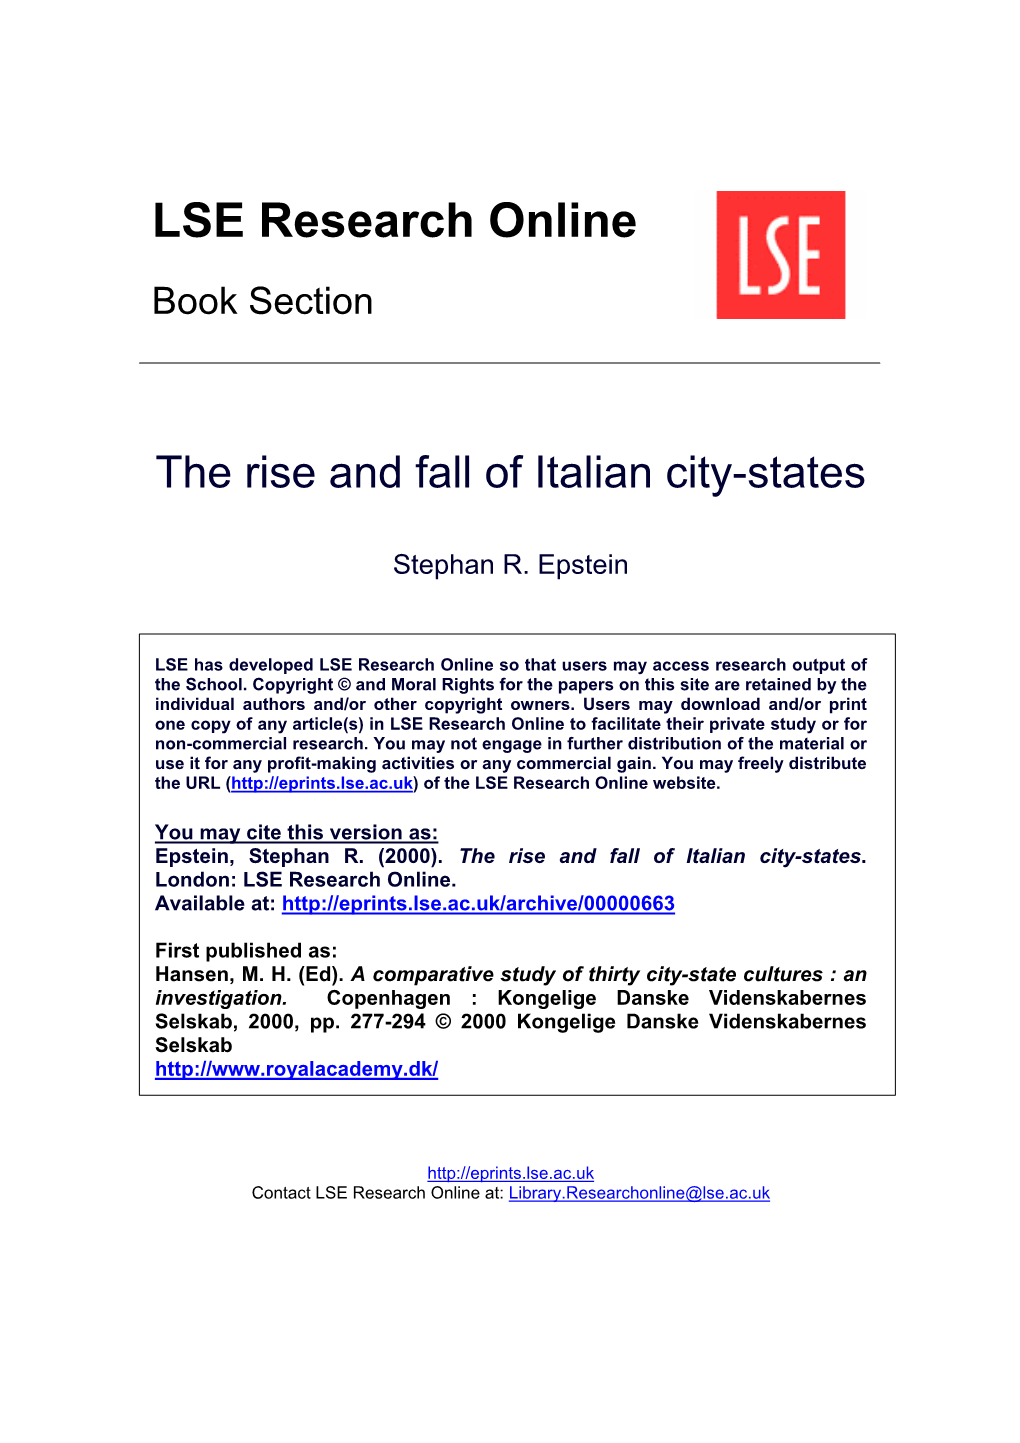 The Rise and Fall of Italian City-States